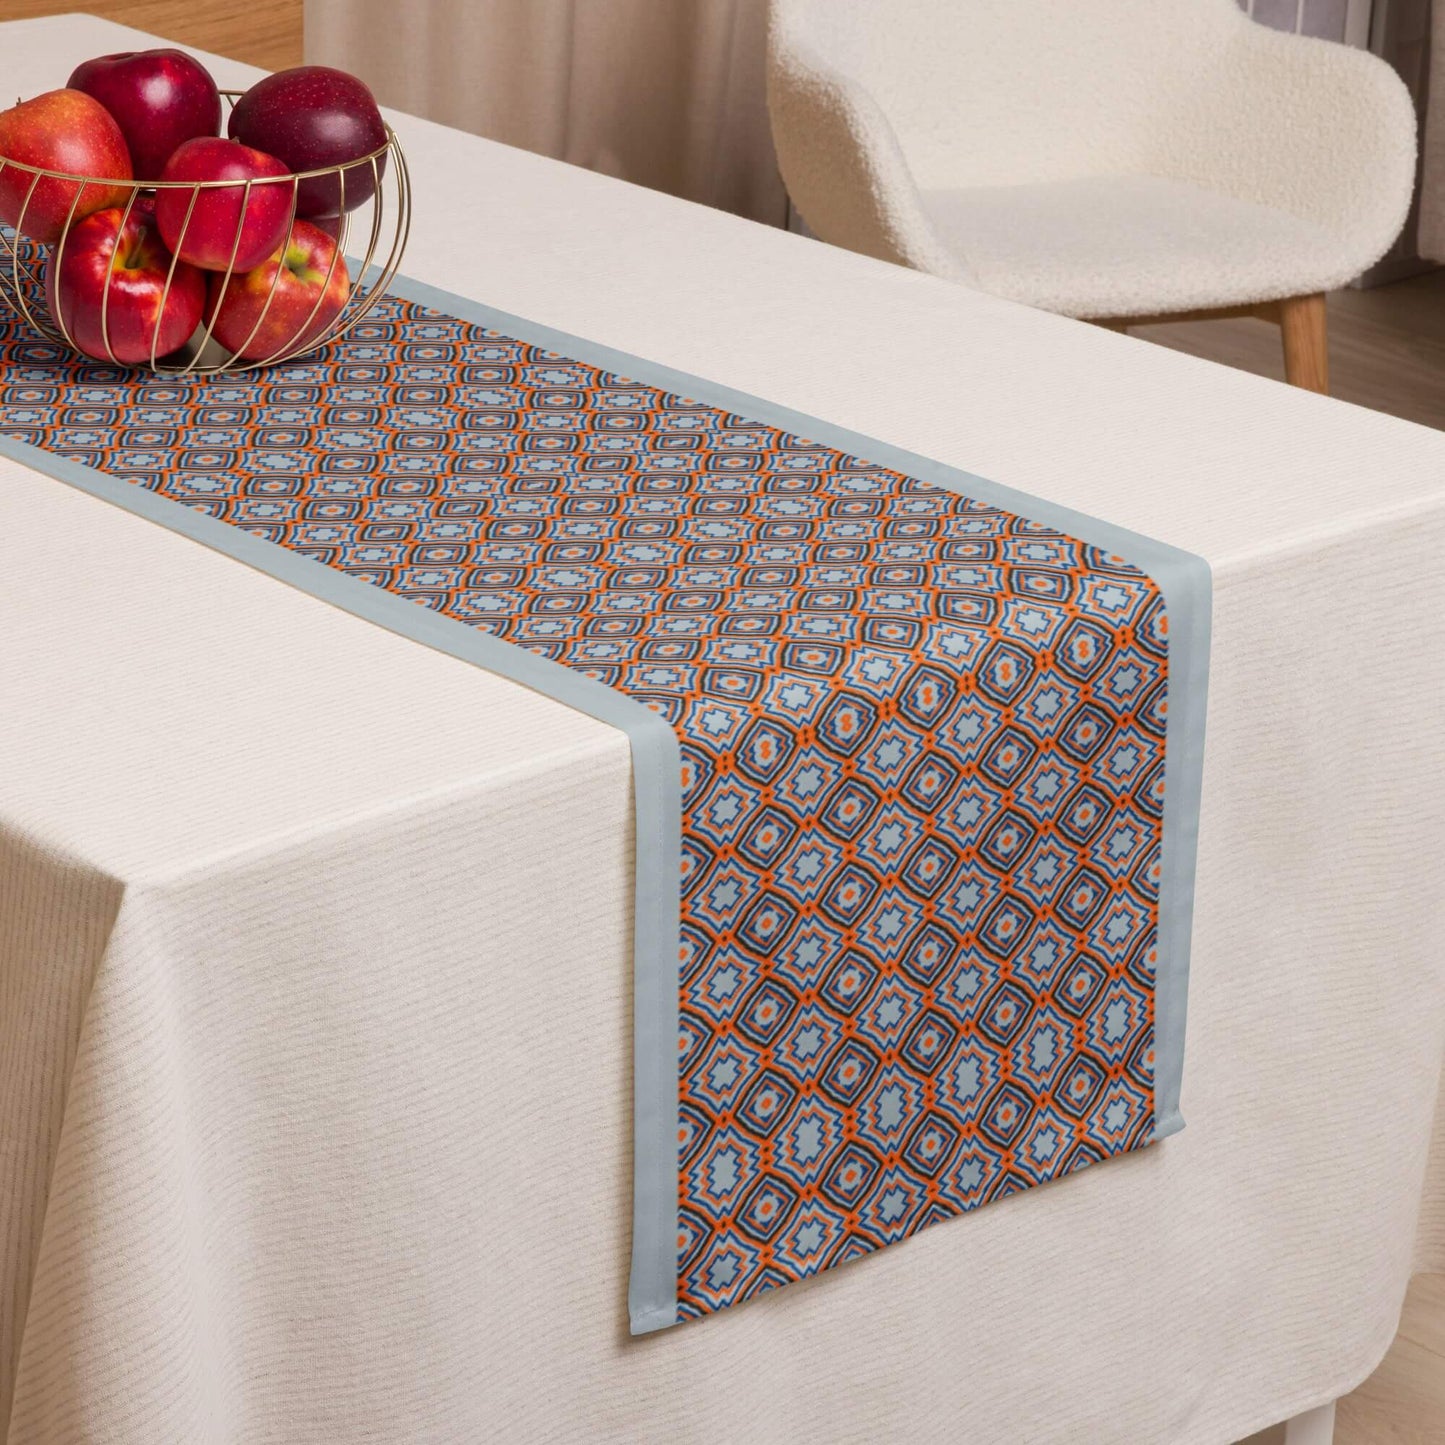 Spring table runner with dusty blue and orange pattern design